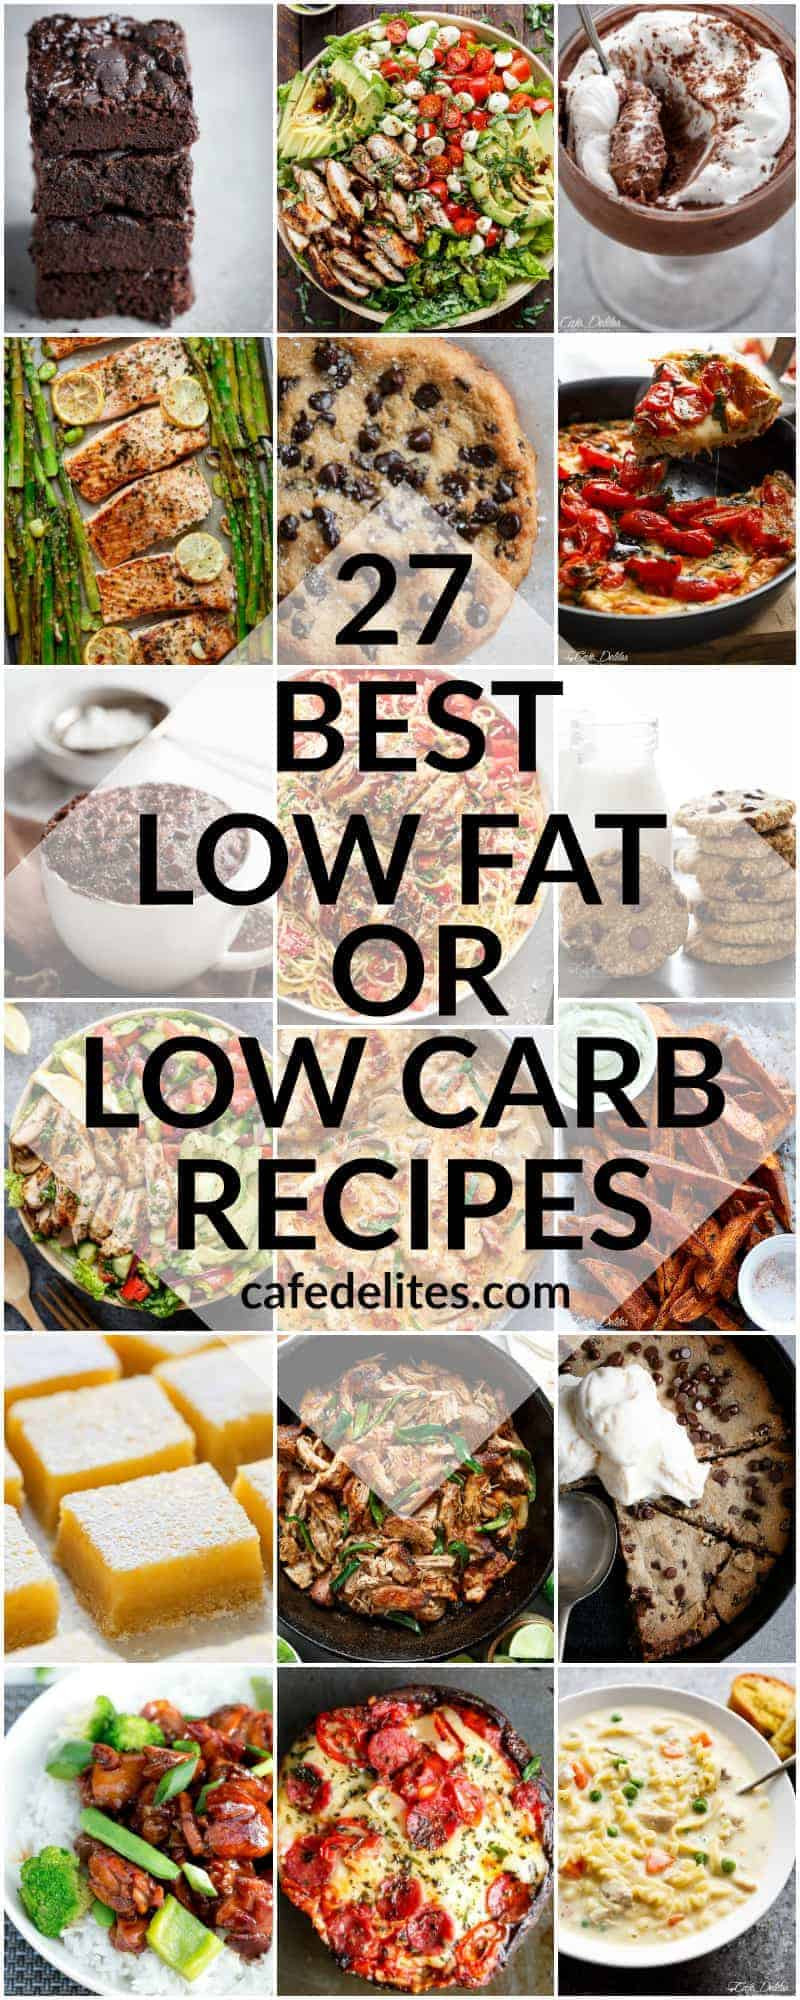 Low Carb Low Cholesterol Recipes Lovely 27 Best Low Fat &amp; Low Carb Recipes for 2017 Cafe Delites